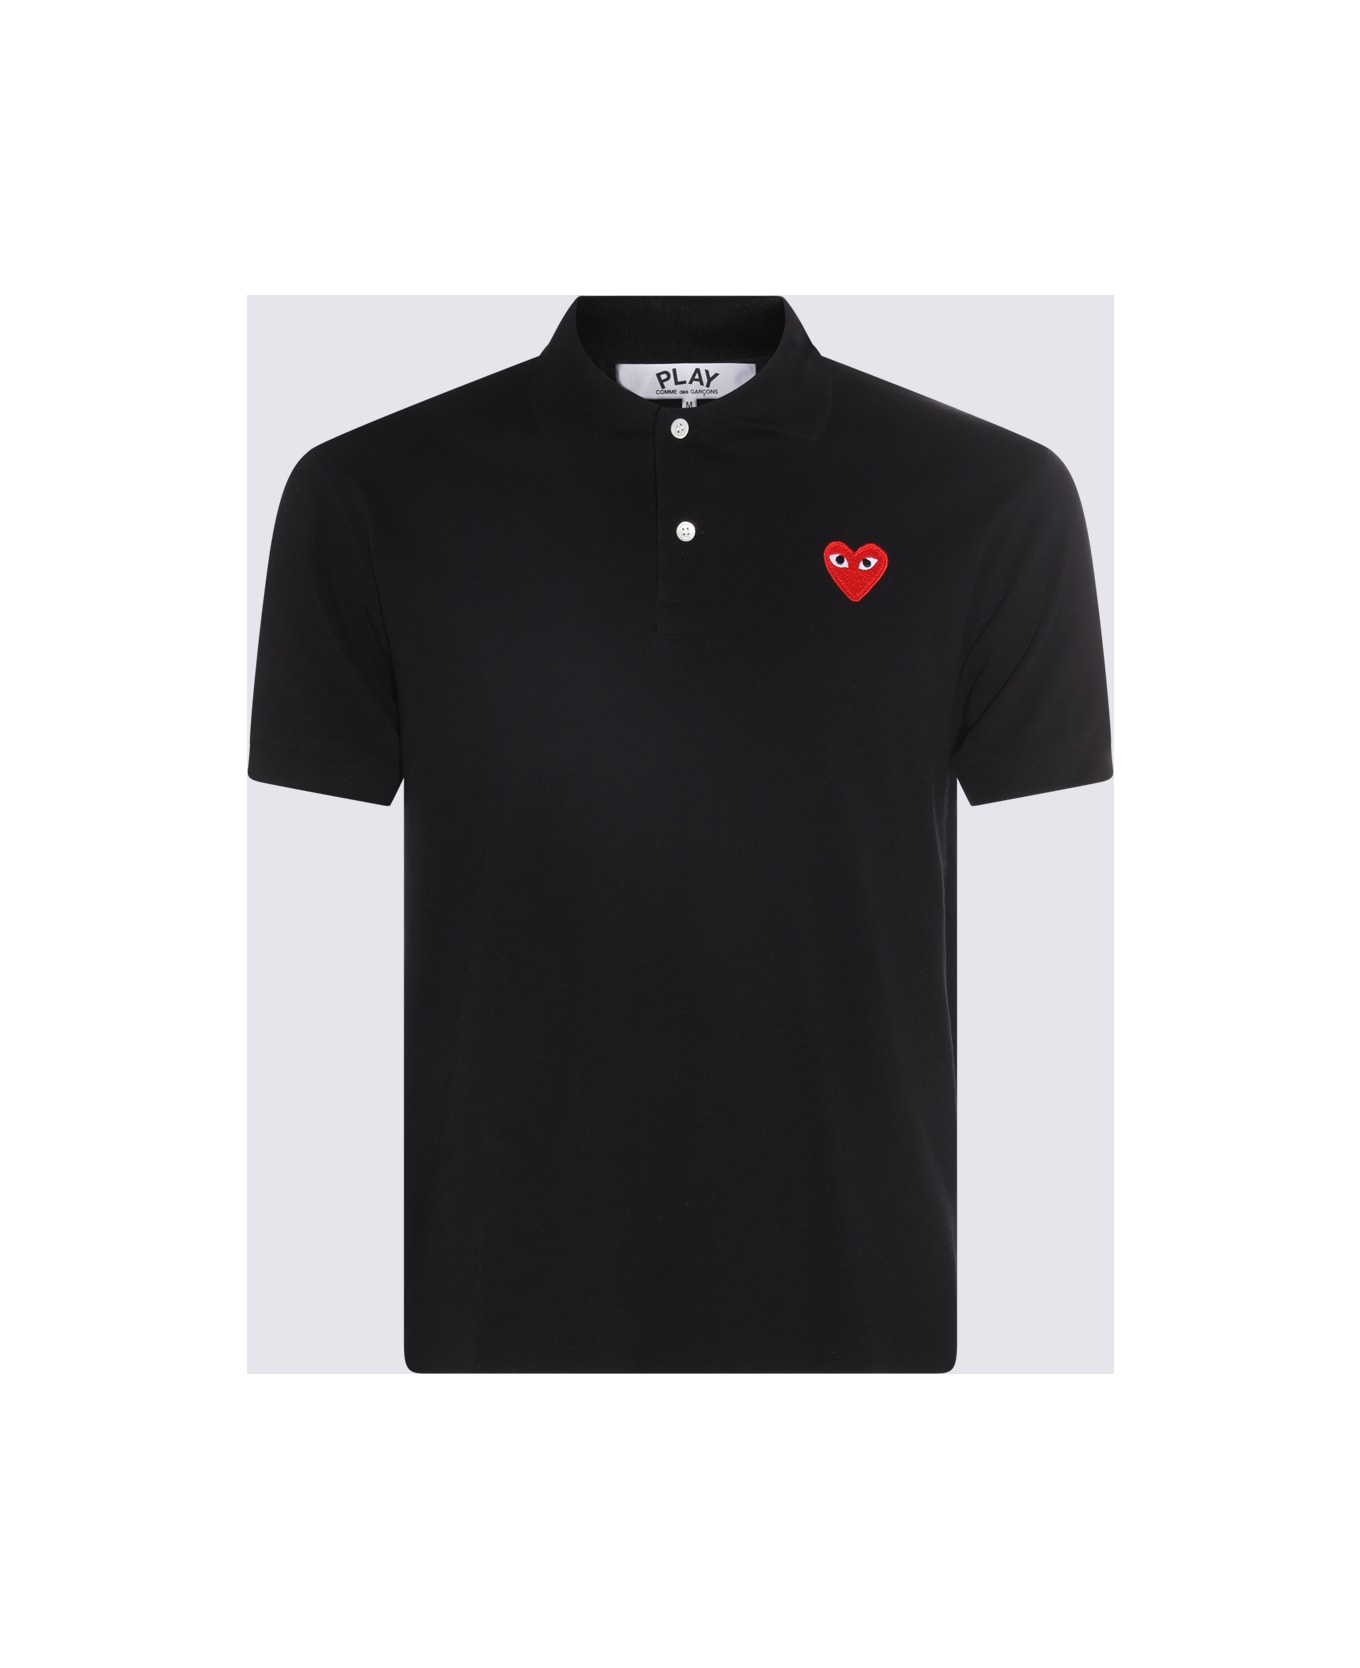 Comme des Garçons Play Black And Red Cotton Play Polo Shirt - Black ポロシャツ